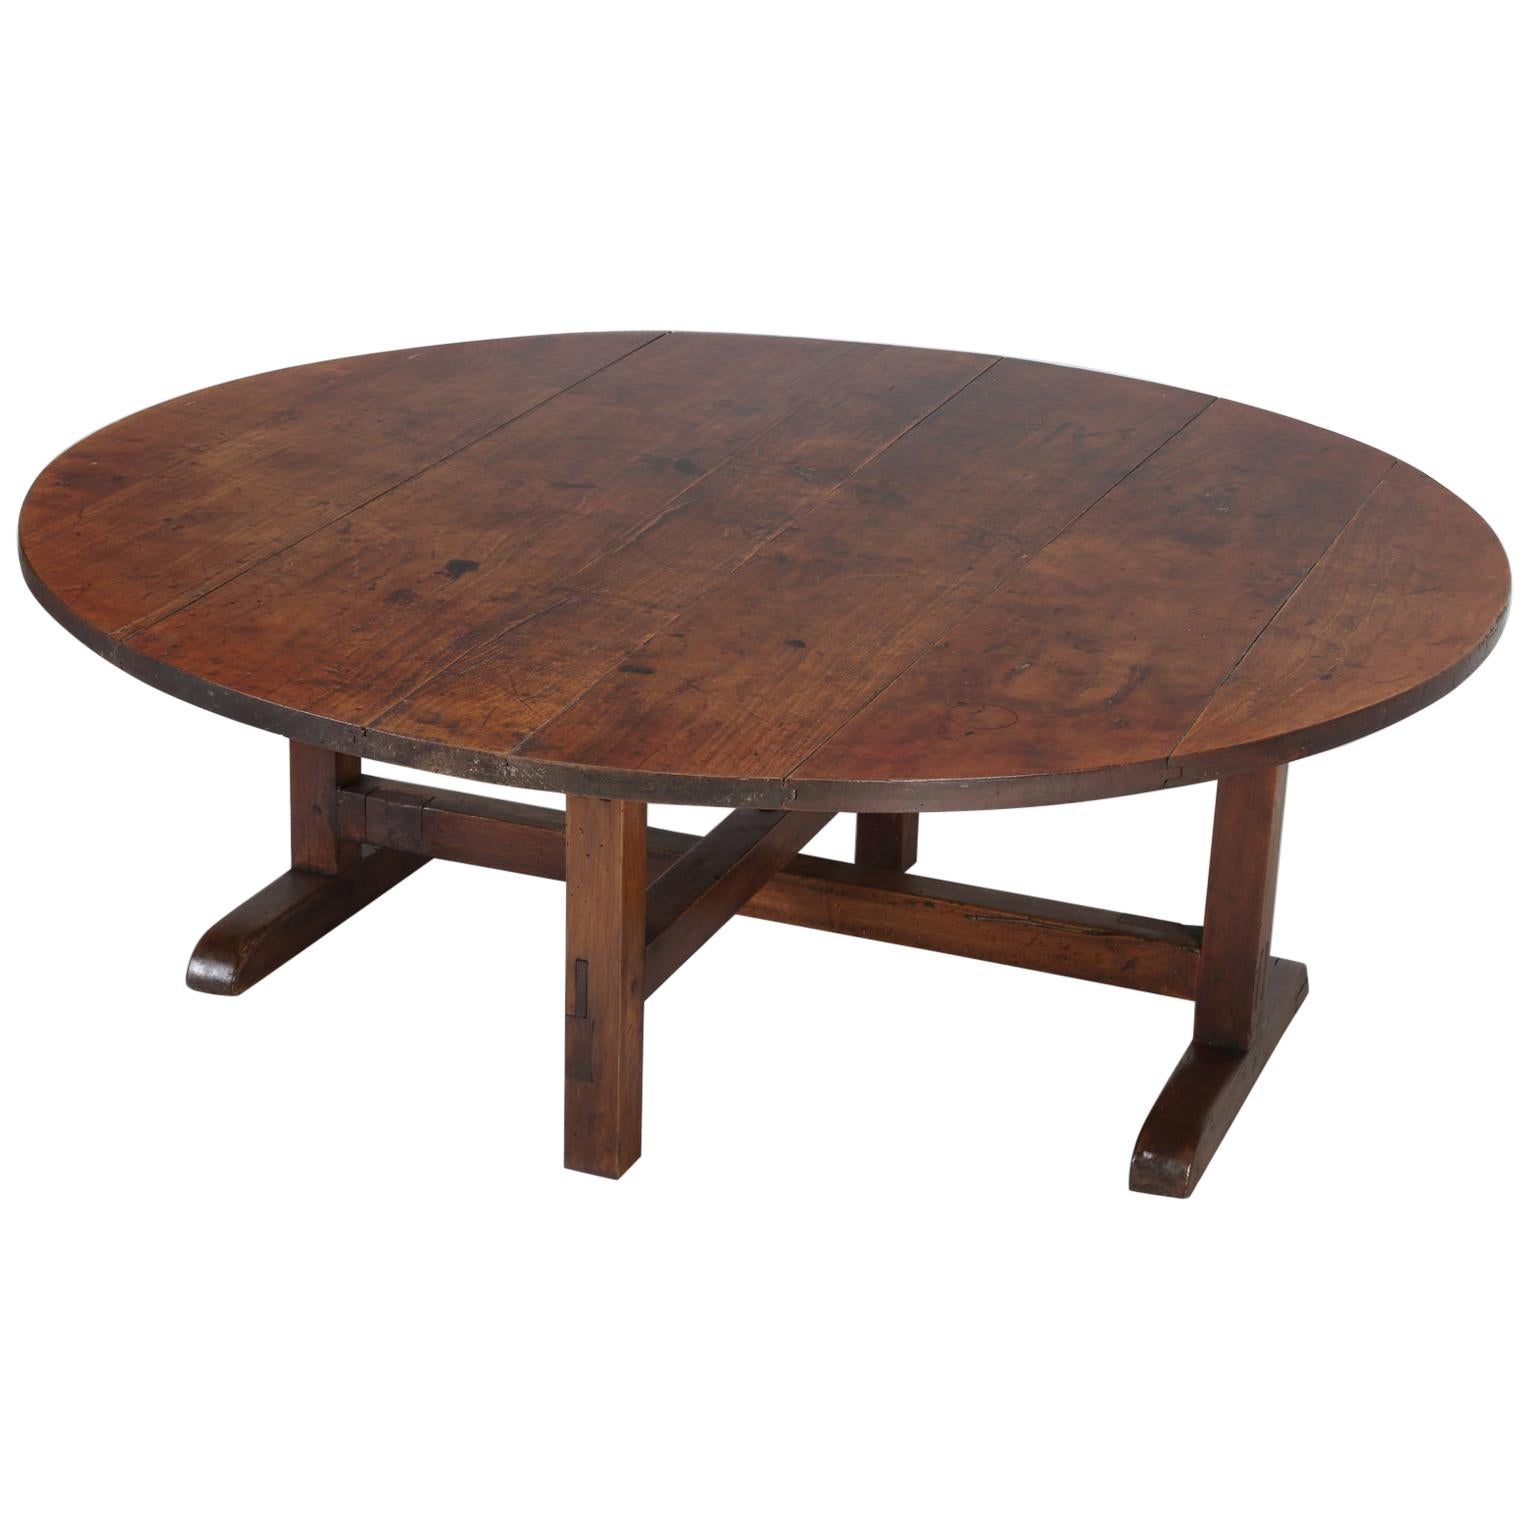 Antique French Cherrywood Coffee Table Created from an Old Wine Tasting Table